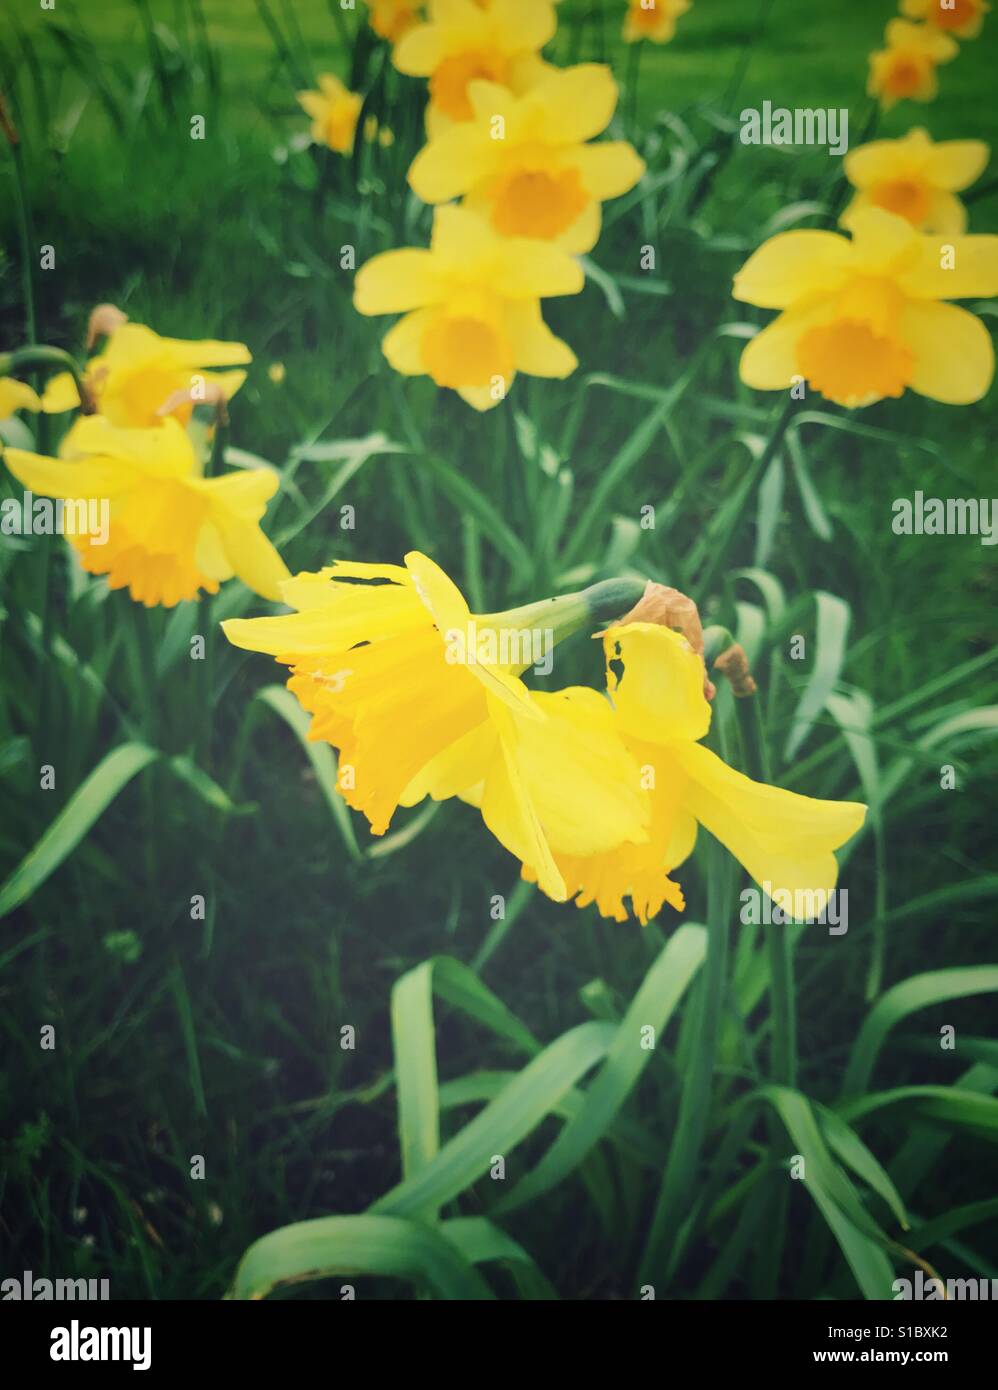 Yellow daffodils blooming in spring Stock Photo